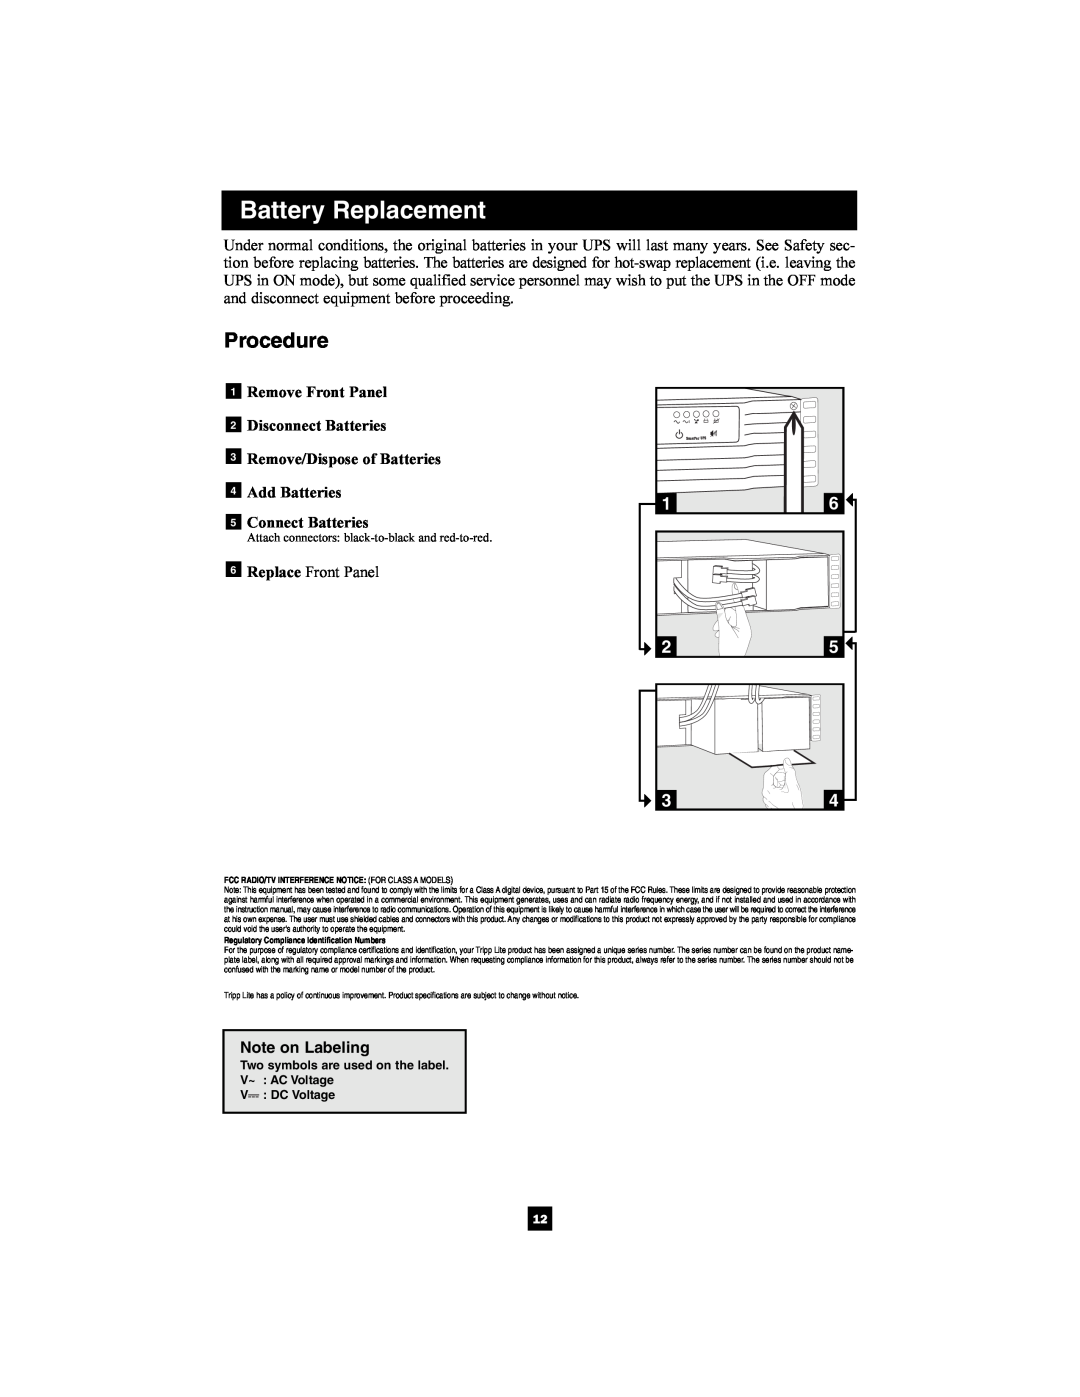 Tripp Lite 1400-3000 VA Procedure, Note on Labeling, Battery Replacement, Attach connectors black-to-black and red-to-red 